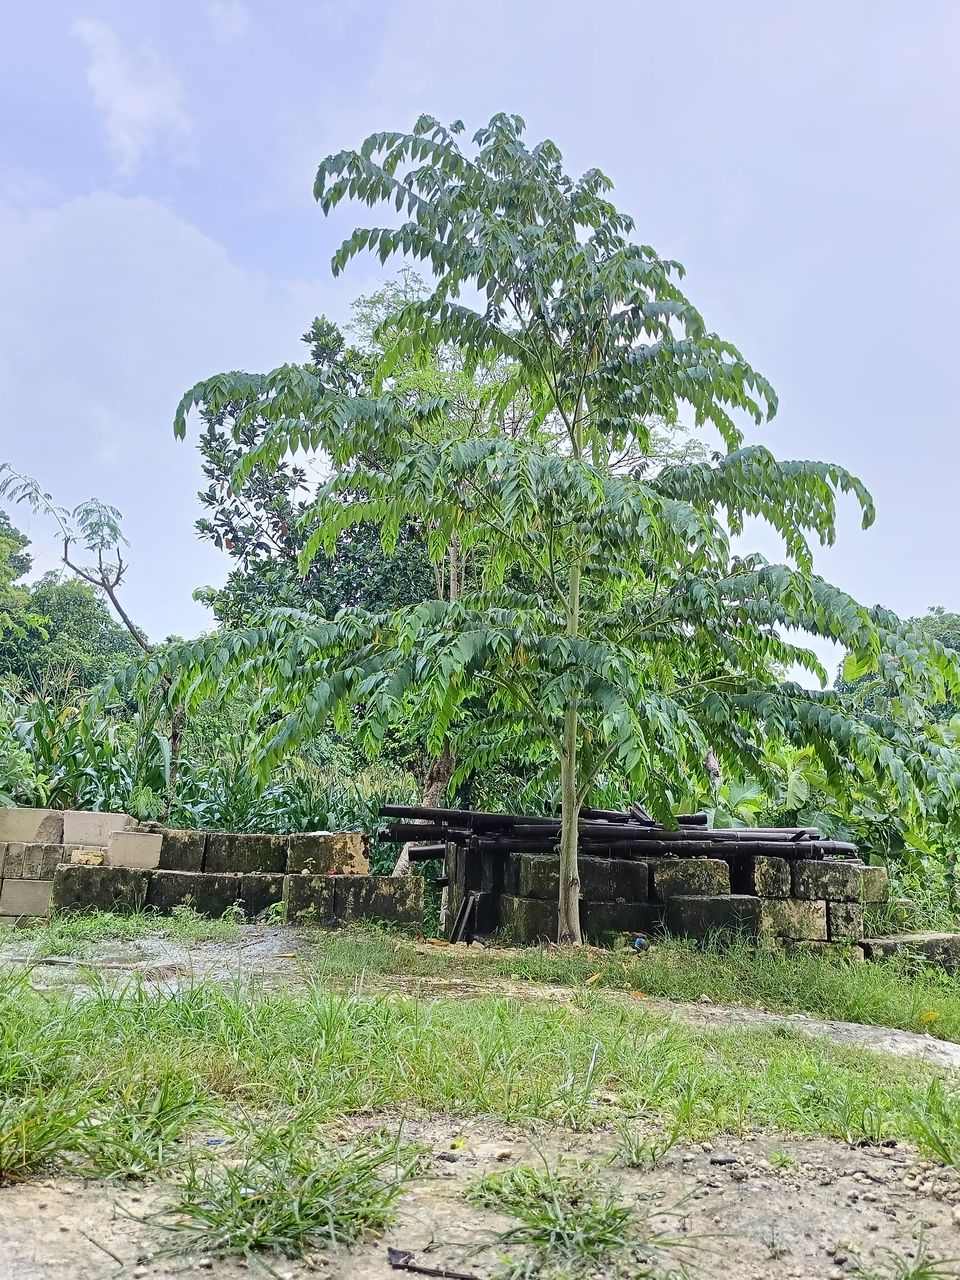 plant, tree, nature, sky, no people, architecture, landscape, green, growth, rural area, environment, outdoors, day, cloud, land, building, built structure, flower, field, rural scene, beauty in nature, house, agriculture, grass, garden, building exterior, plantation